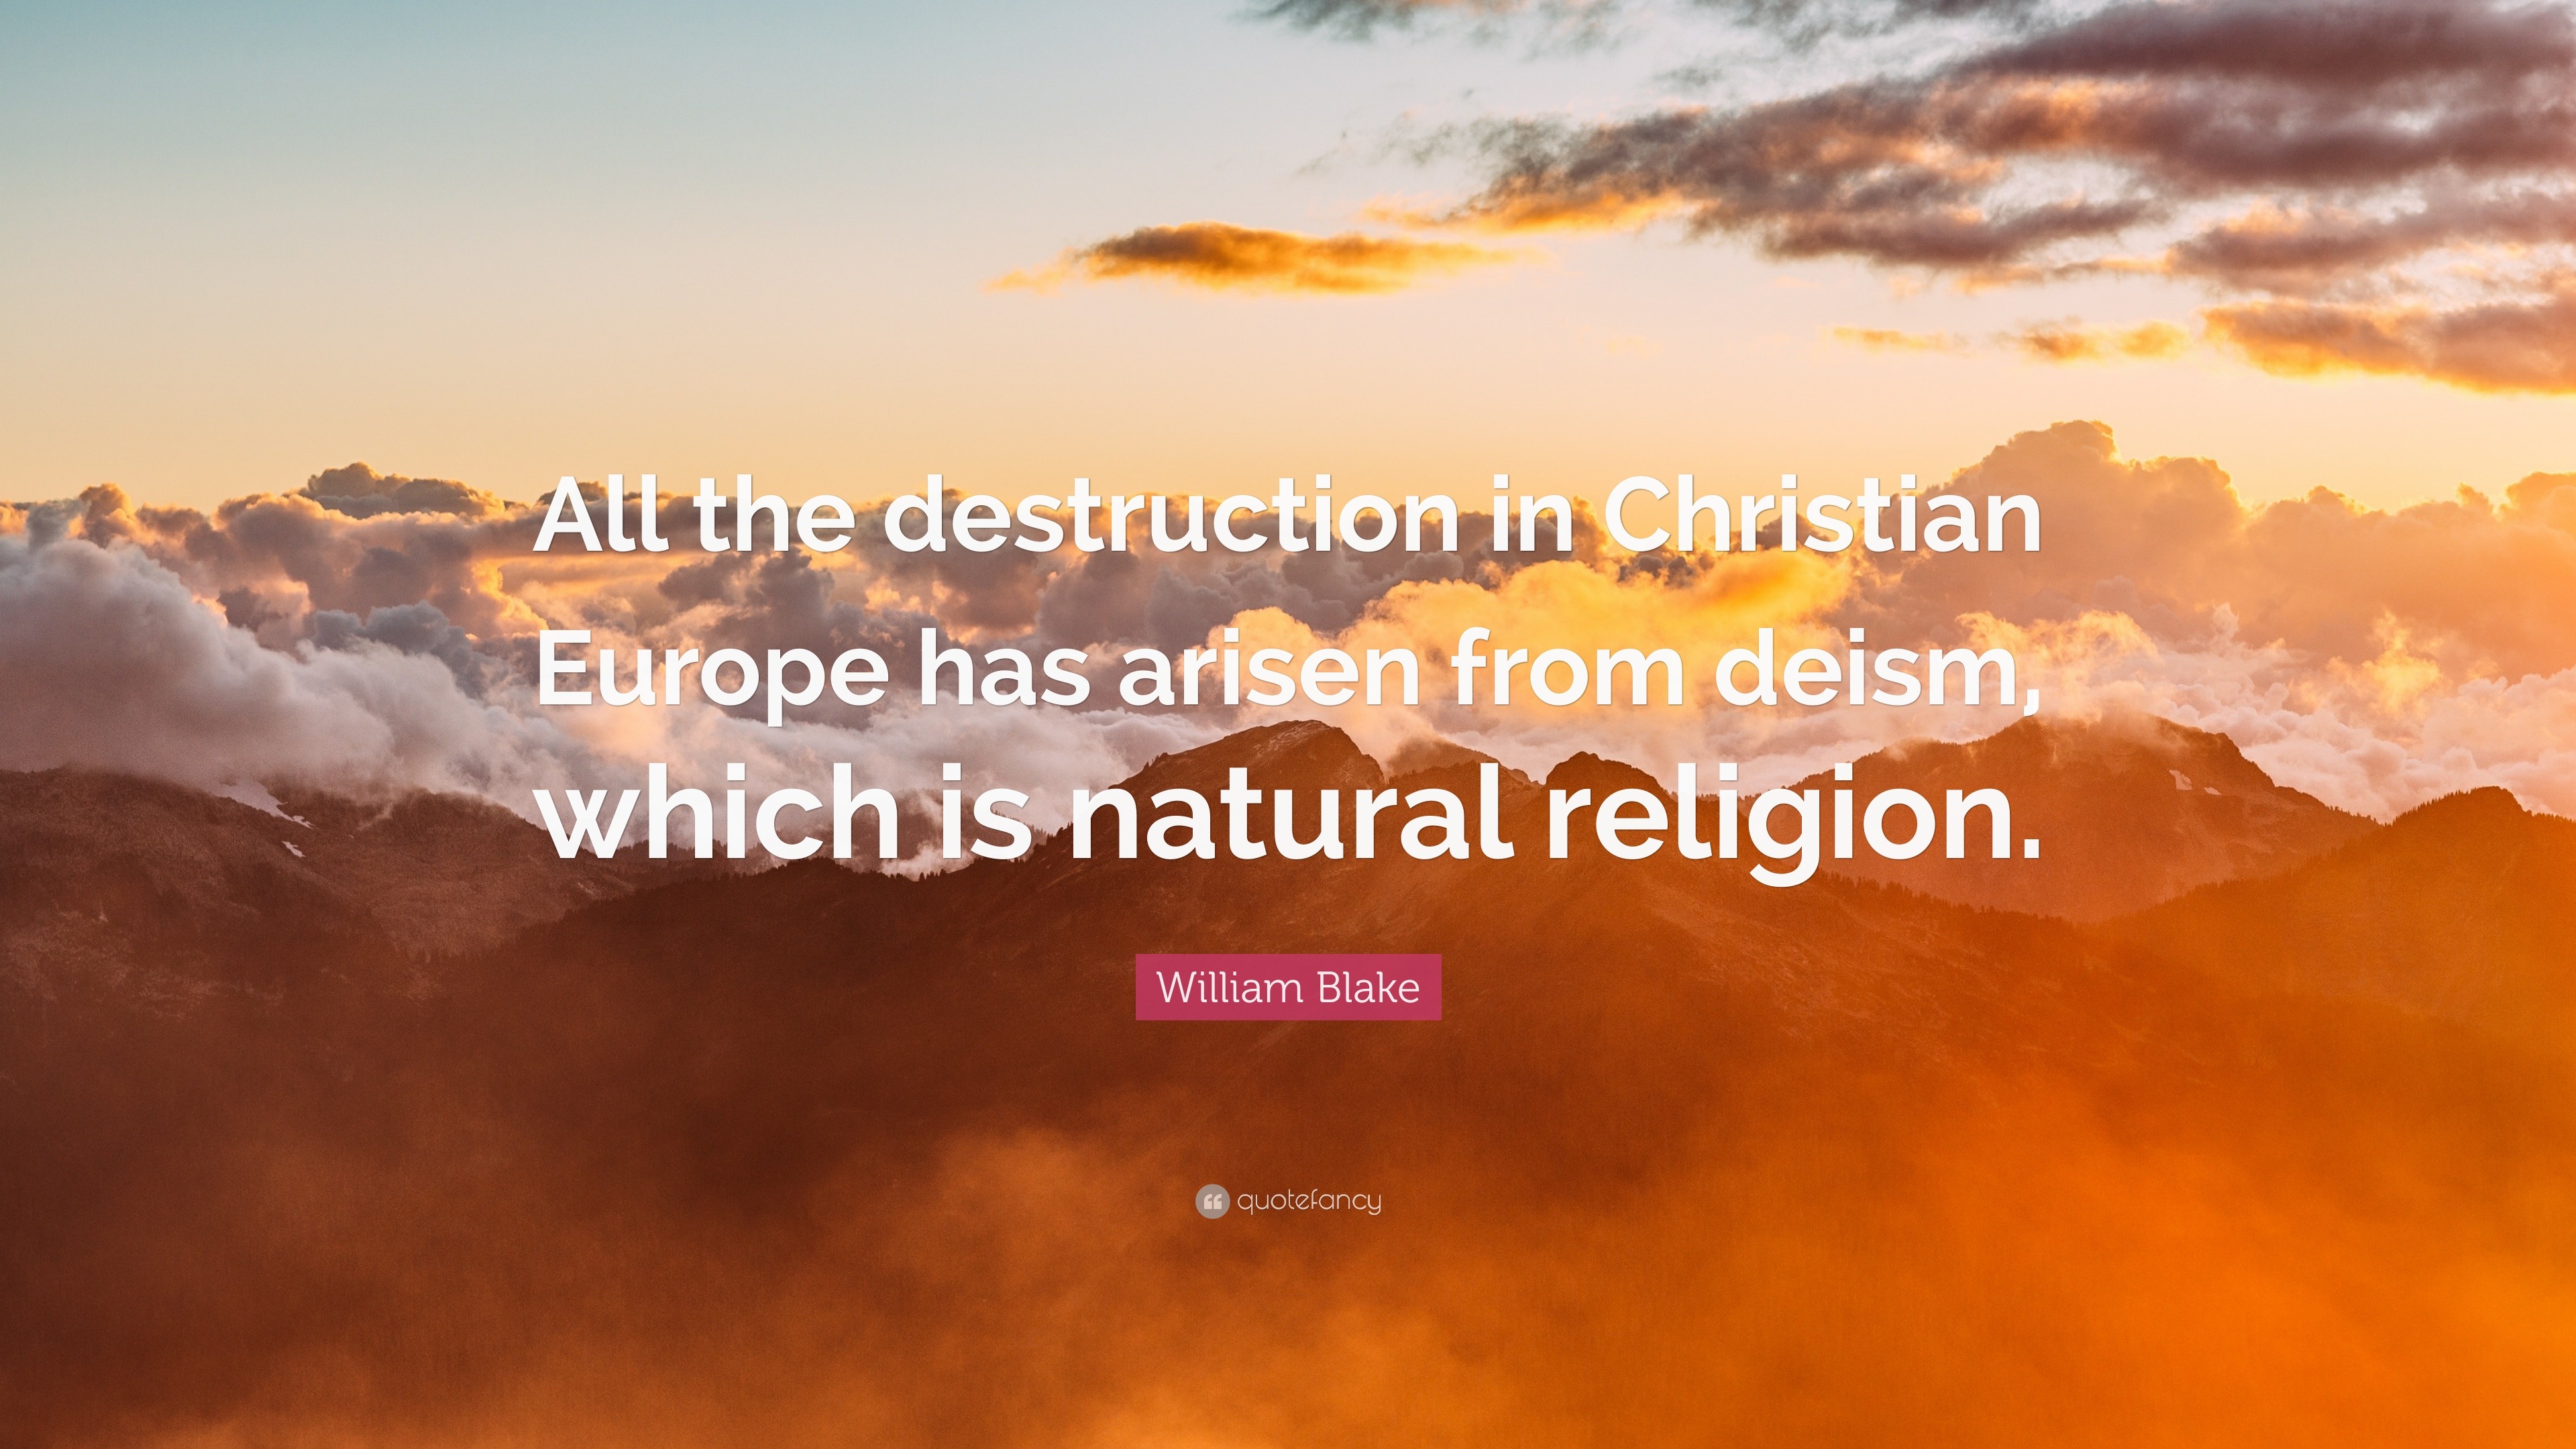 William Blake Quote: "All the destruction in Christian ...